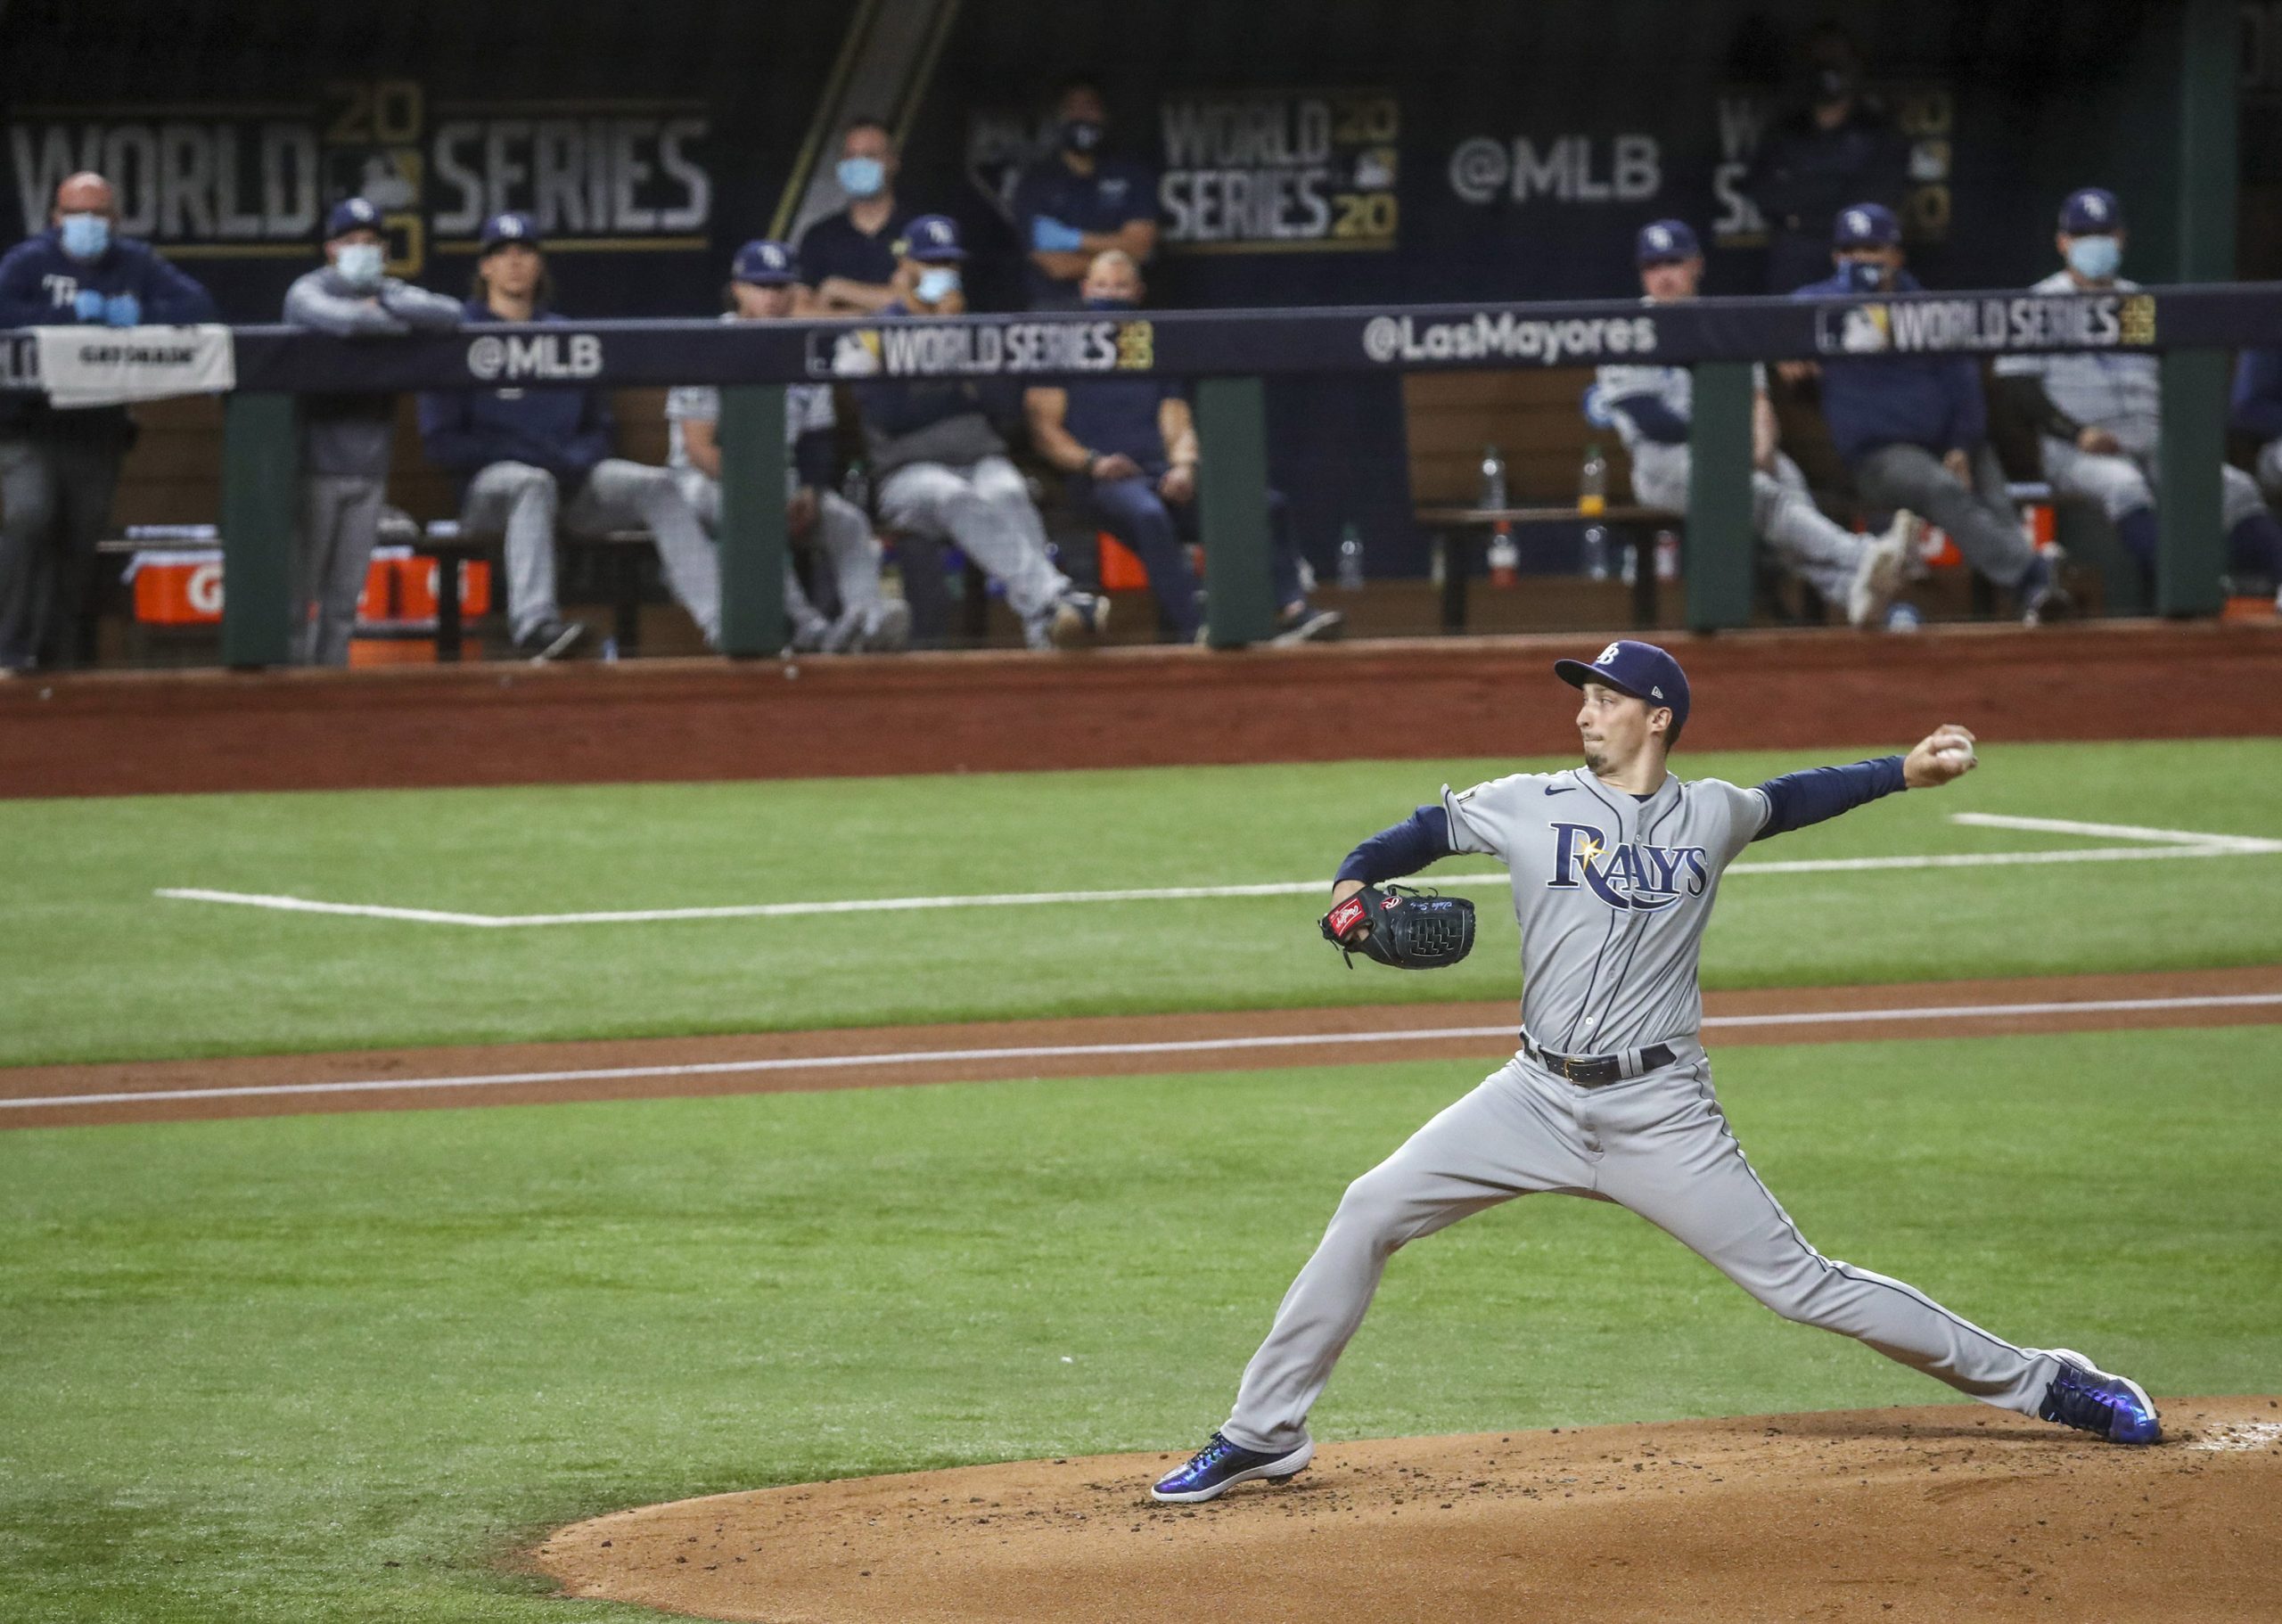 Tampa Bay Rays starting pitcher Blake Snell throws in the first inning against the Los Angeles Dodgers in Game 6 of the World Series at Globe Life Field in Arlington, Texas, on Tuesday, Oct. 27, 2020. The Dodgers won, 3-1, to clinch the series. (Dirk Shadd/Tampa Bay Times/TNS)